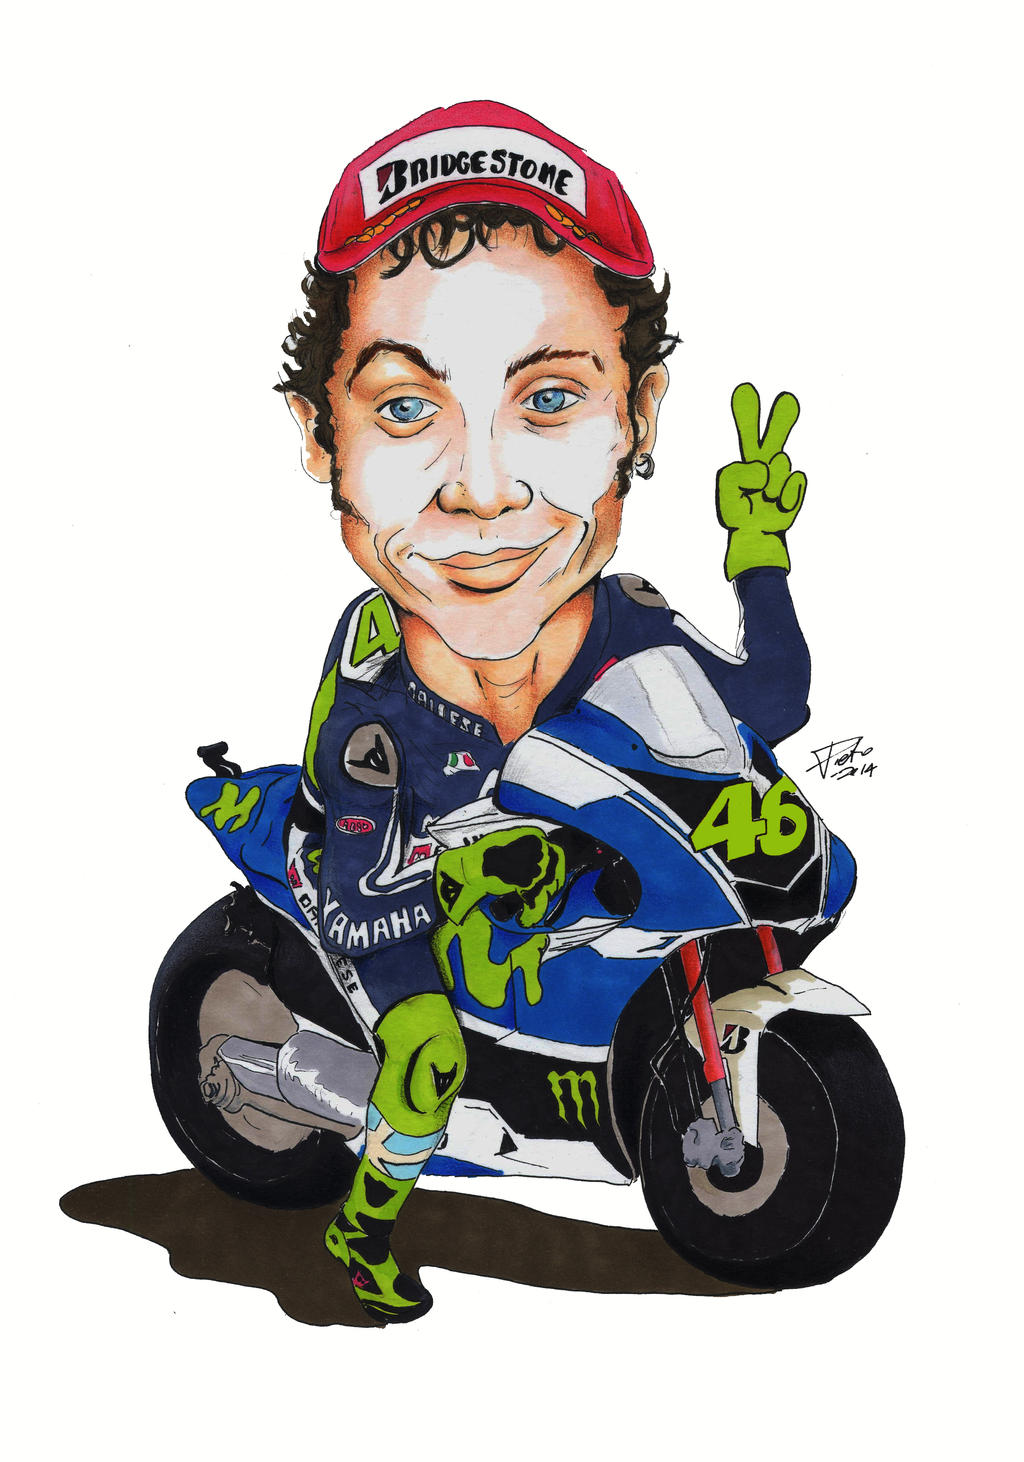 Universel Fugtig Diligence 39- Valentino Rossi by Peterbandle85 on DeviantArt